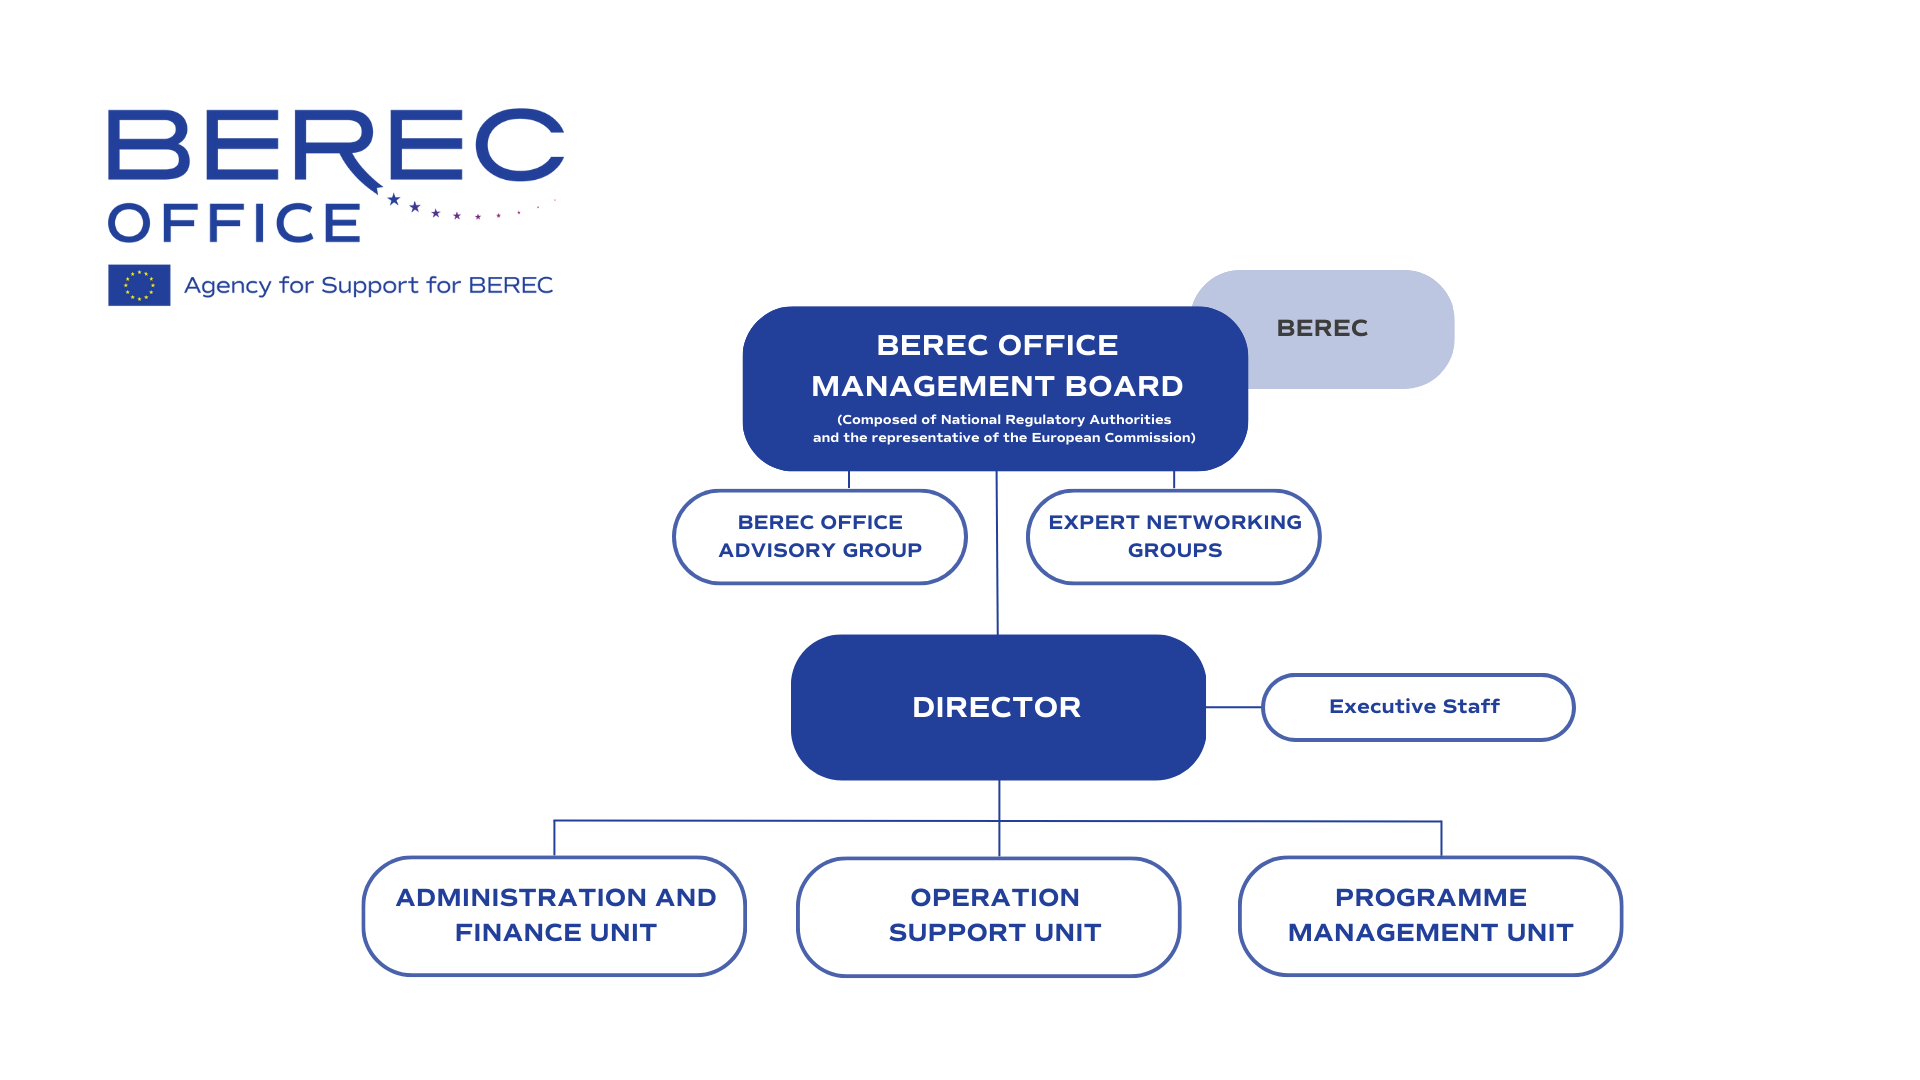 The image shows the BEREC Office Organisational chart, also described in the text below